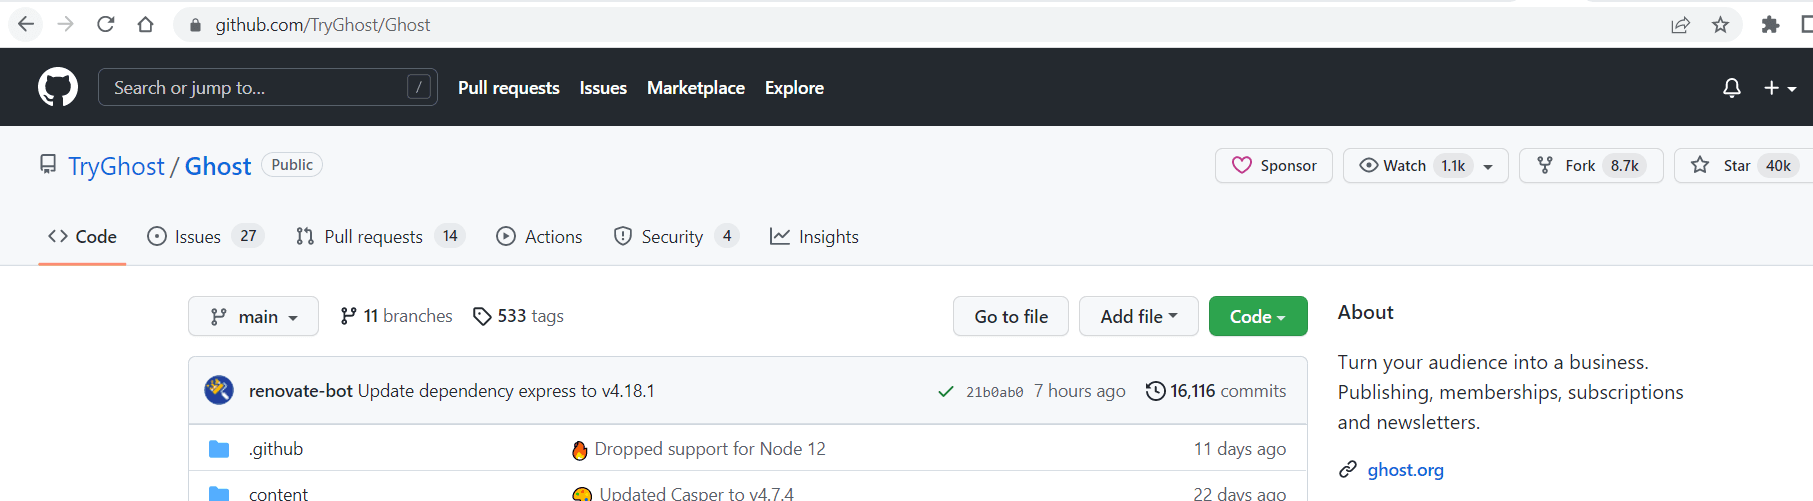 GitHub repo of the Ghost platform